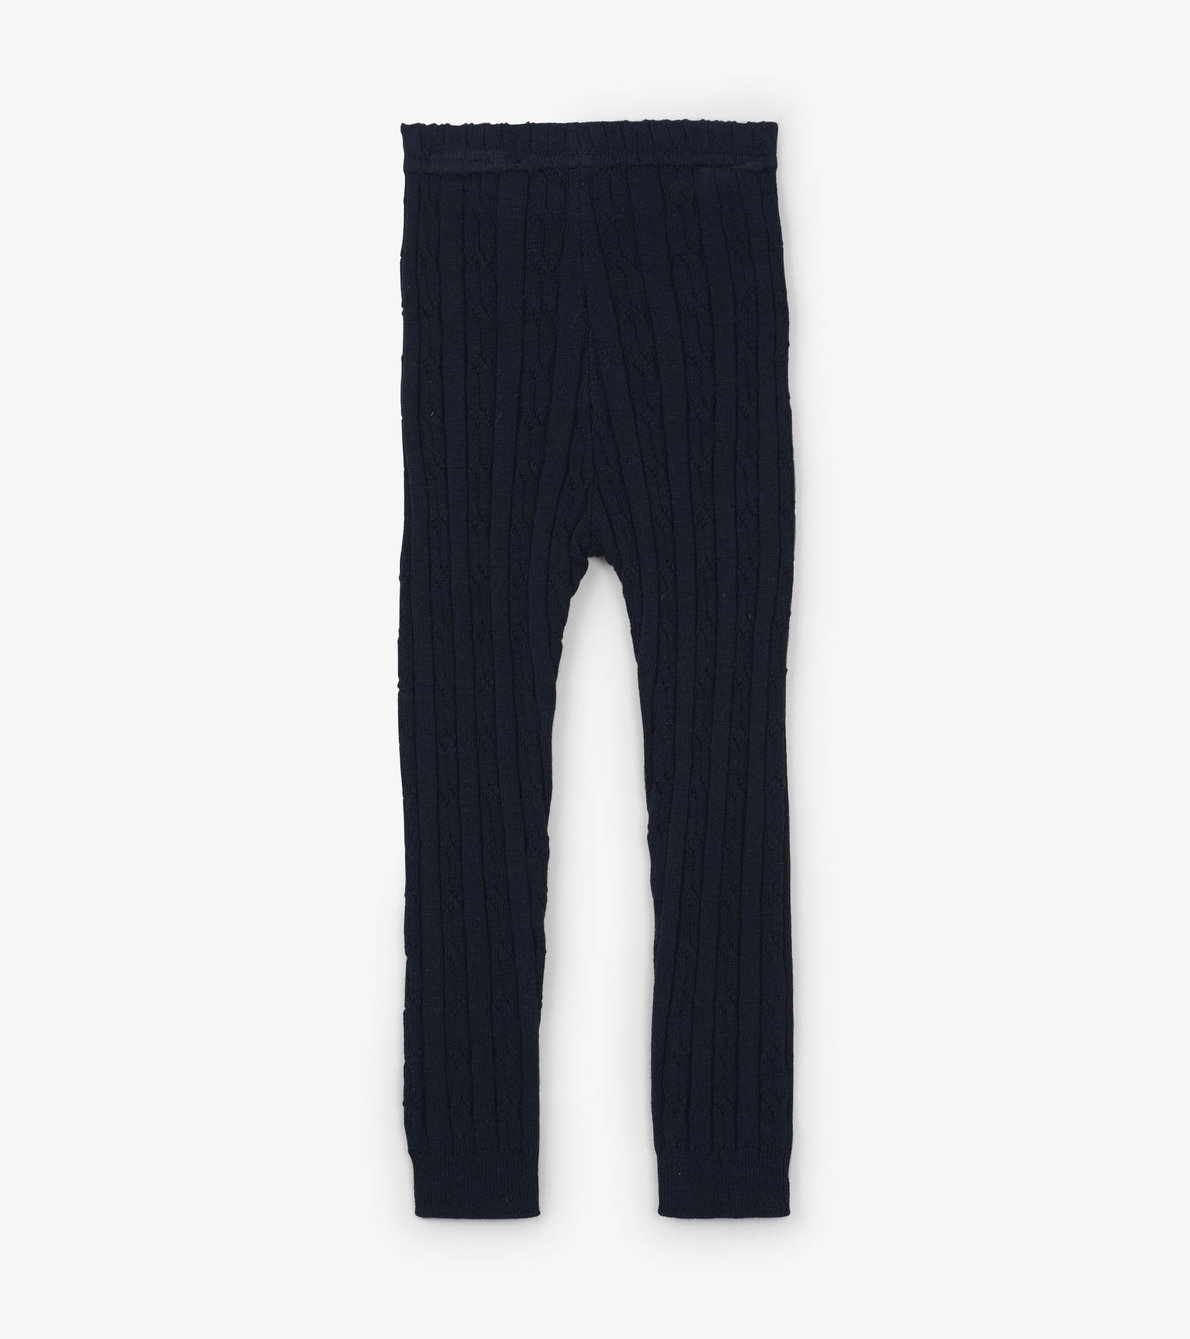 View larger image of Baby Navy Cable Knit Leggings